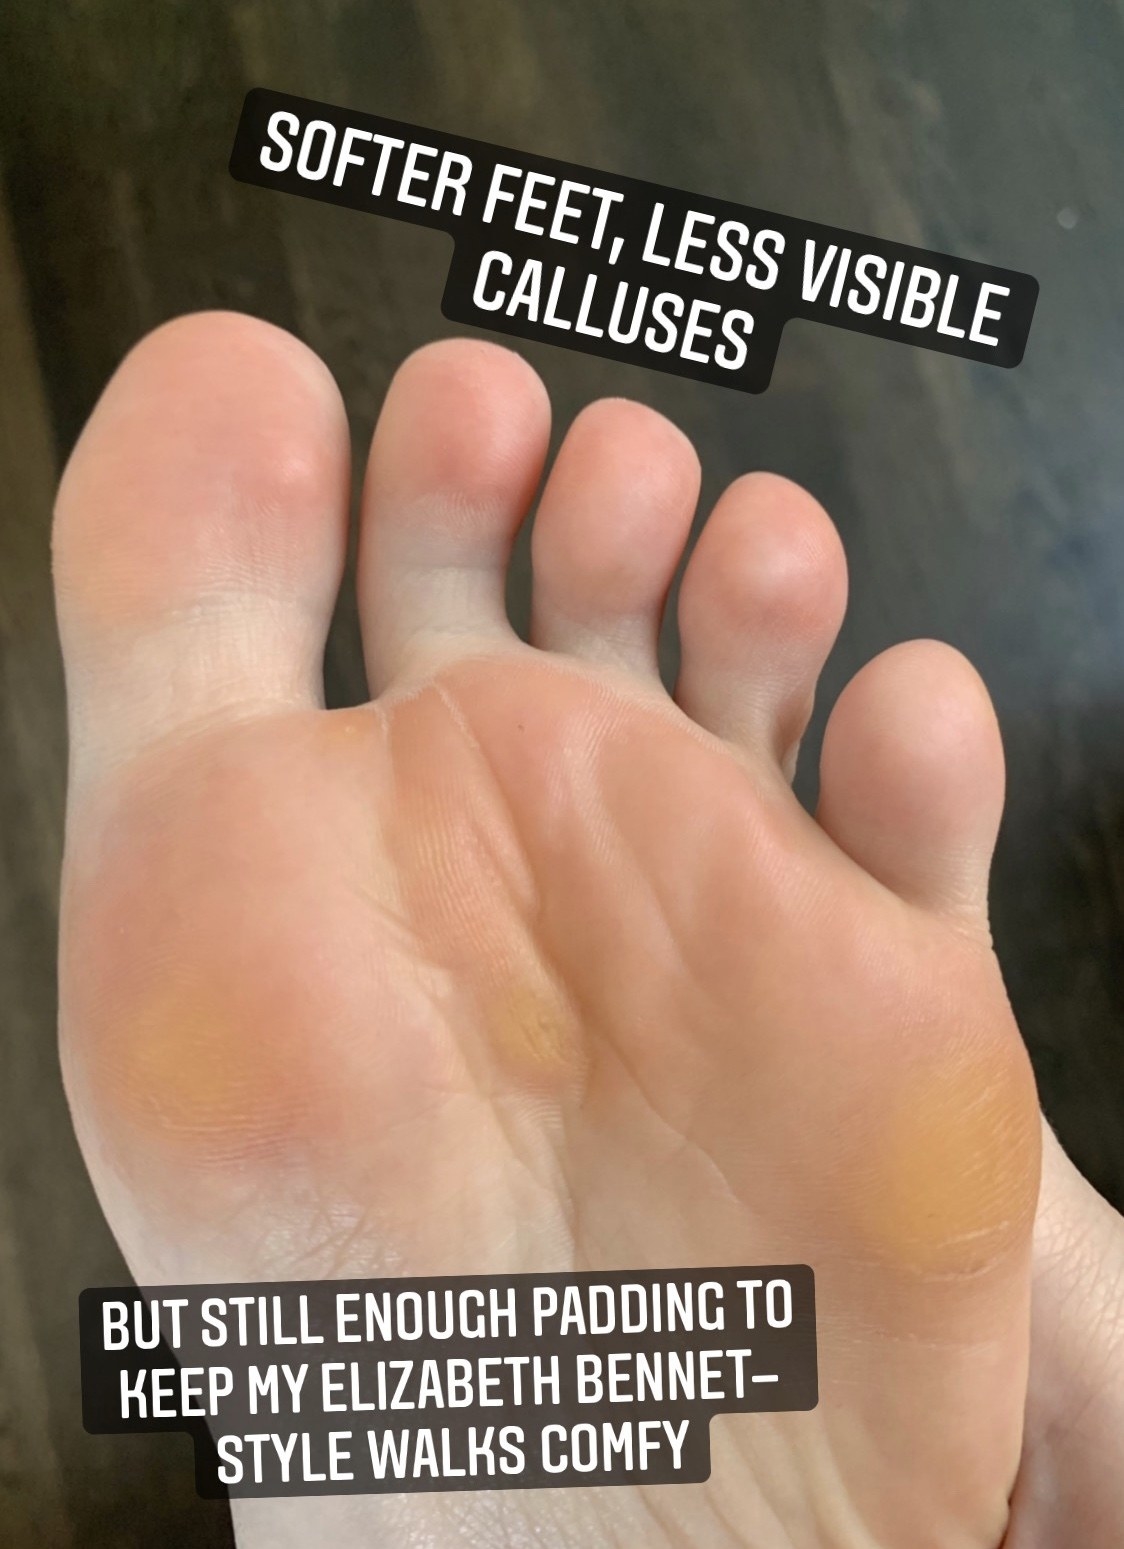 Author&#x27;s feet after baby foot with softer, less visible calluses but text &quot;still enough padding to keep my elizabeth bennet style walks comfy&quot;